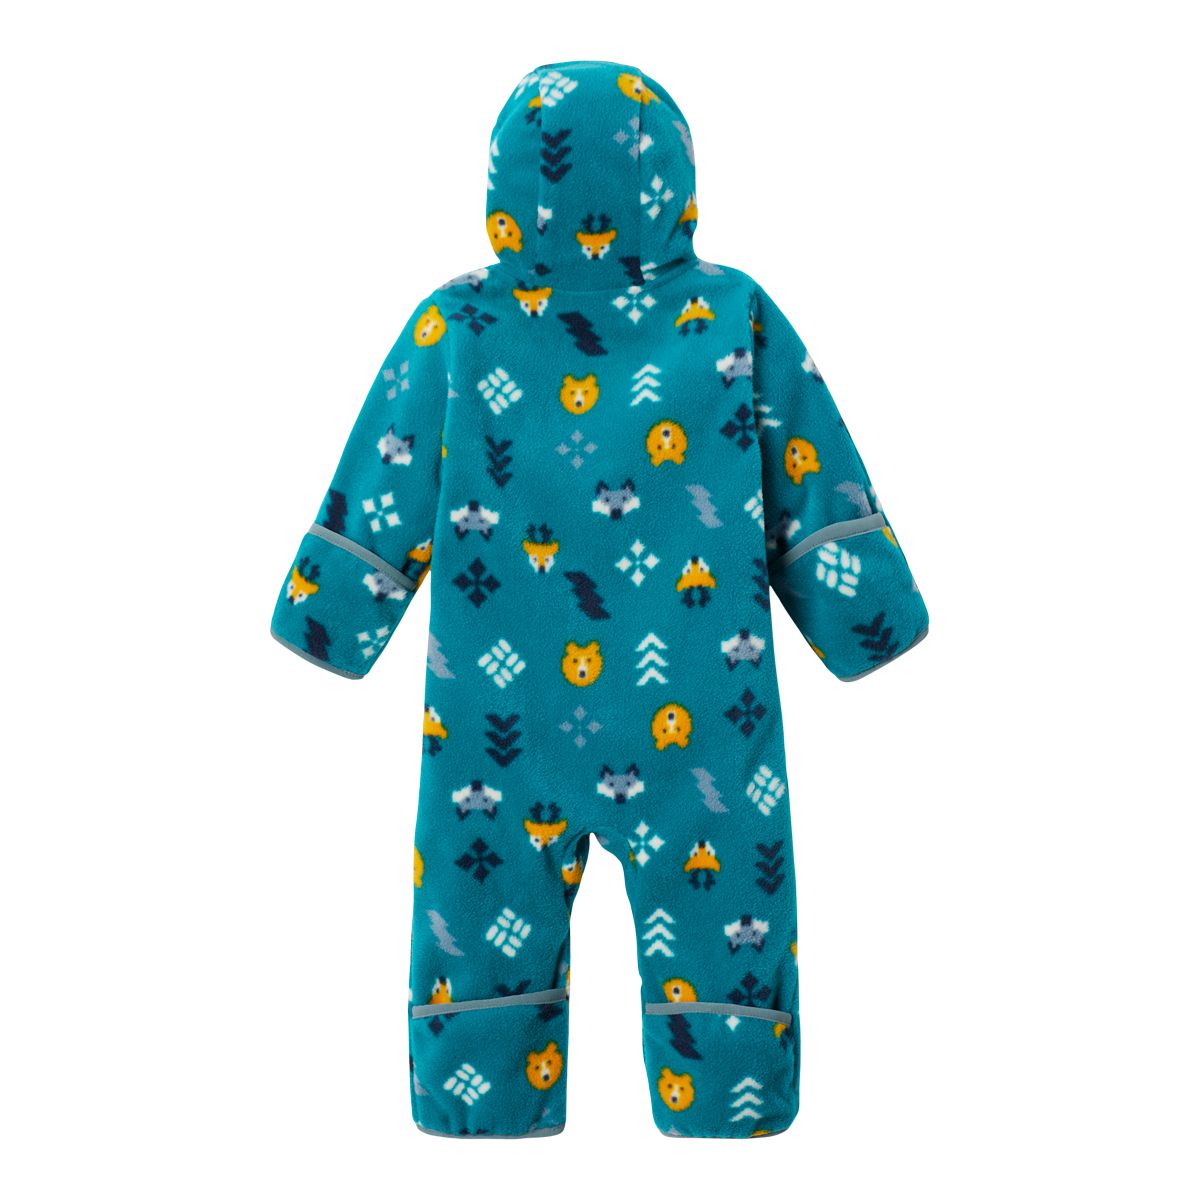 Image of Columbia Infant Boys' Snowtop II Bunting Suit